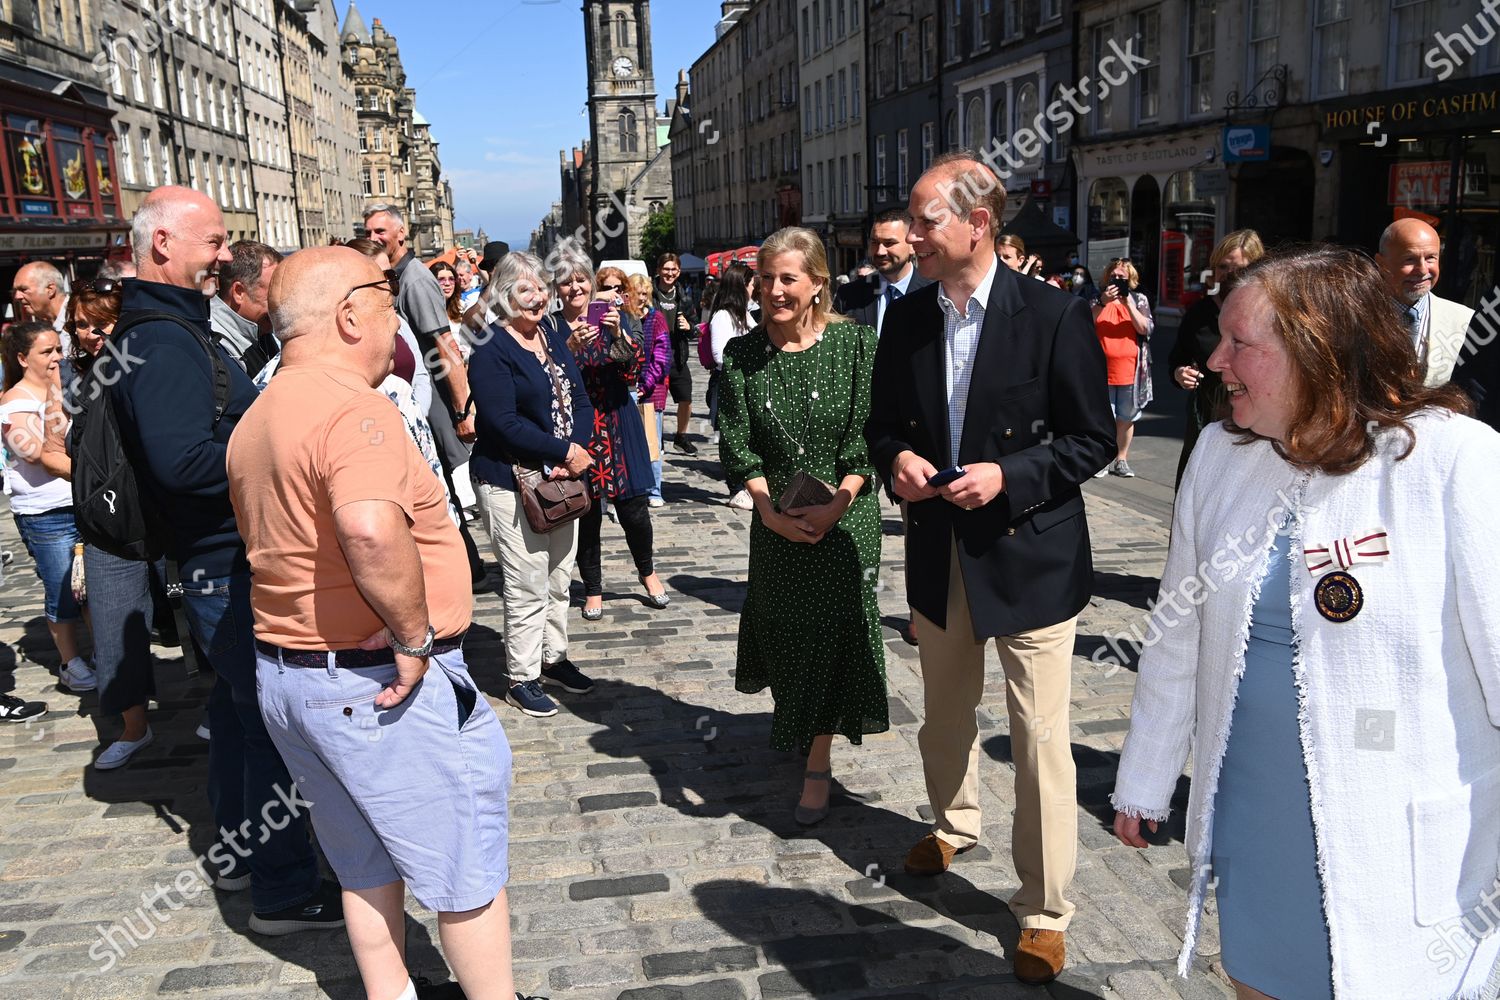 prince-edward-and-sophie-countess-of-wessex-visit-to-edinburgh-scotland-uk-shutterstock-editorial-12173651ch.jpg